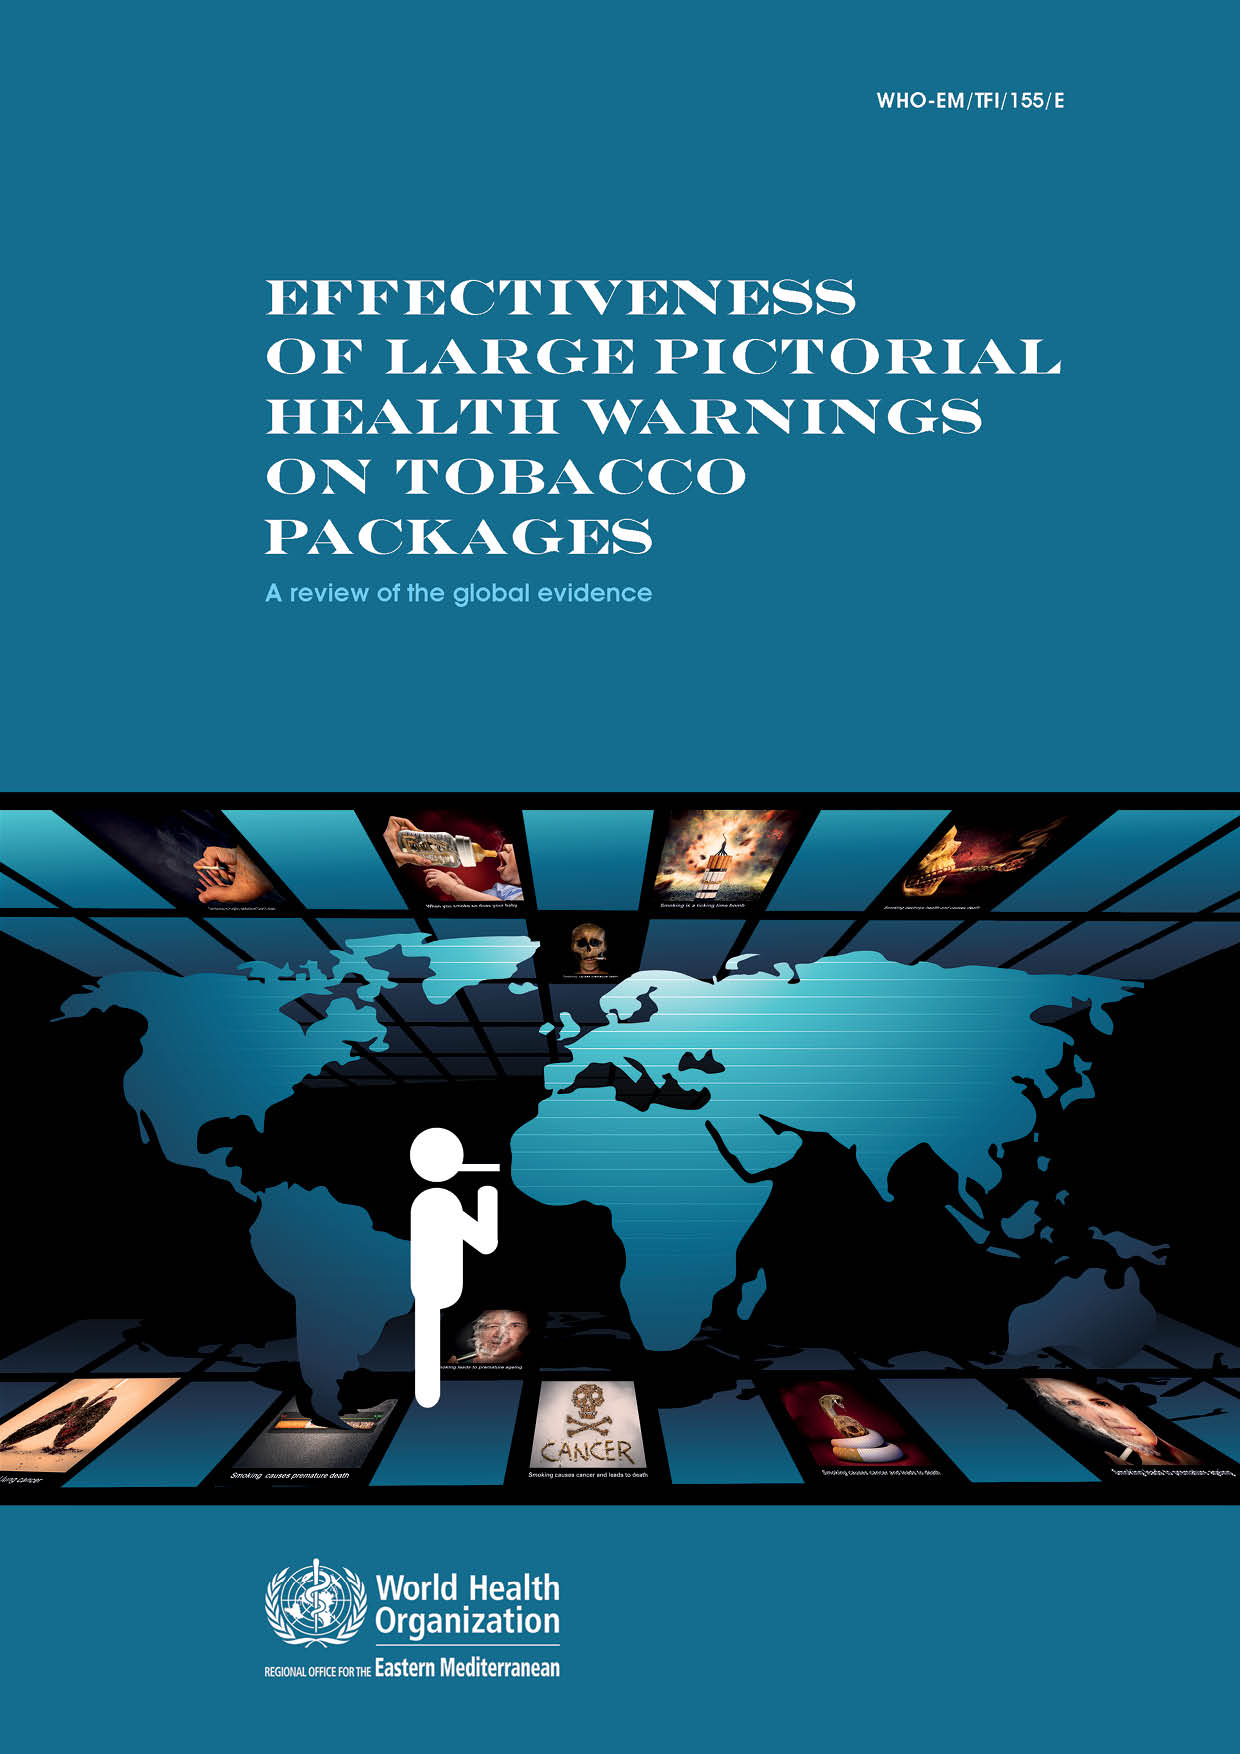 Effectiveness of large pictorial health warnings on tobacco packages: A review of the global evidence